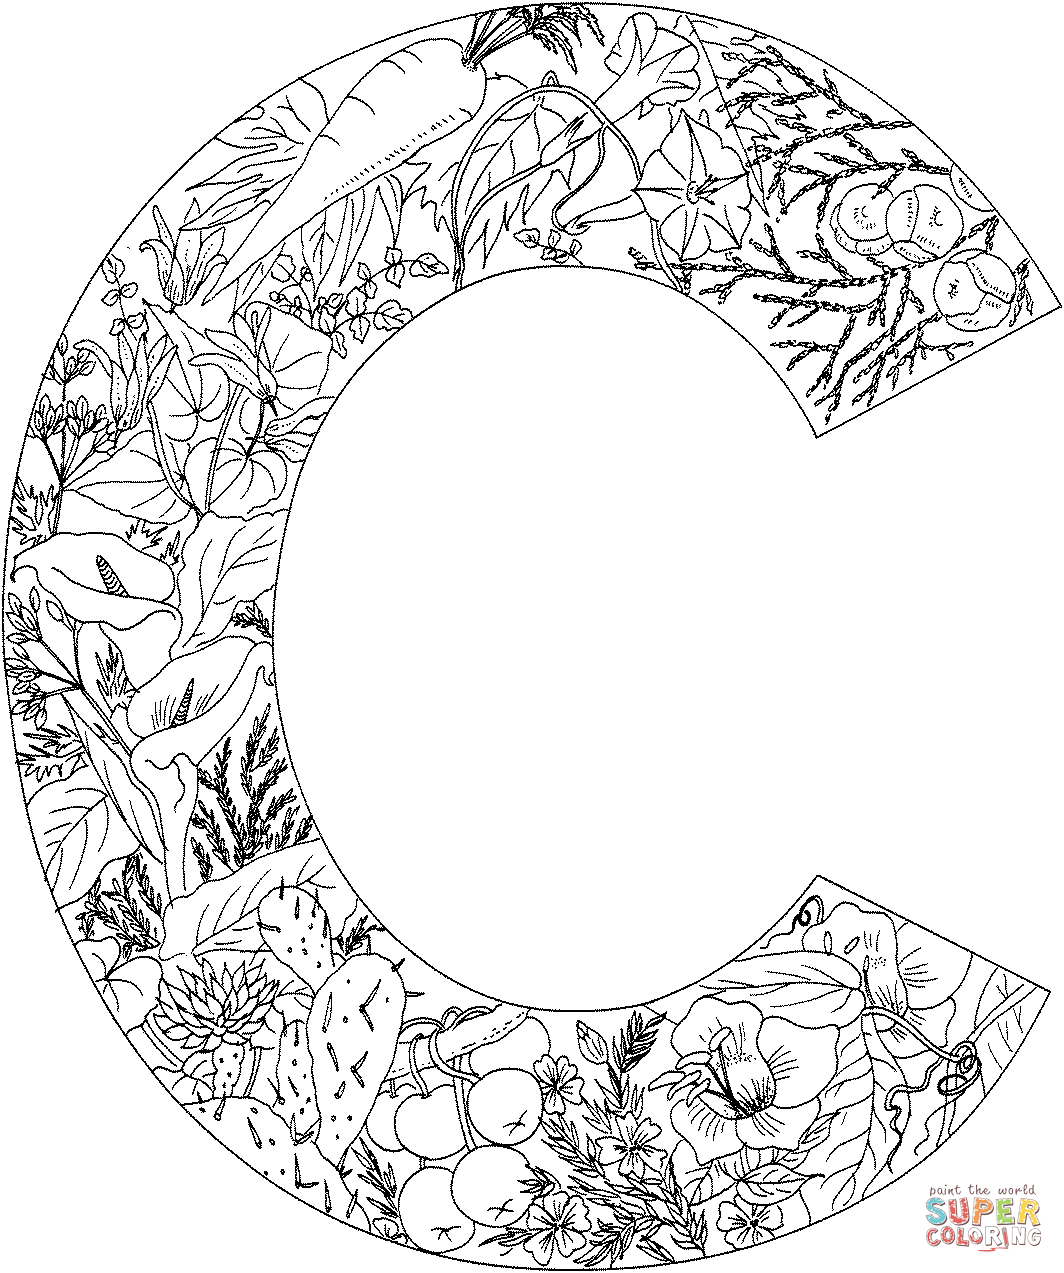 English Alphabet with Plants coloring pages | Free Coloring Pages